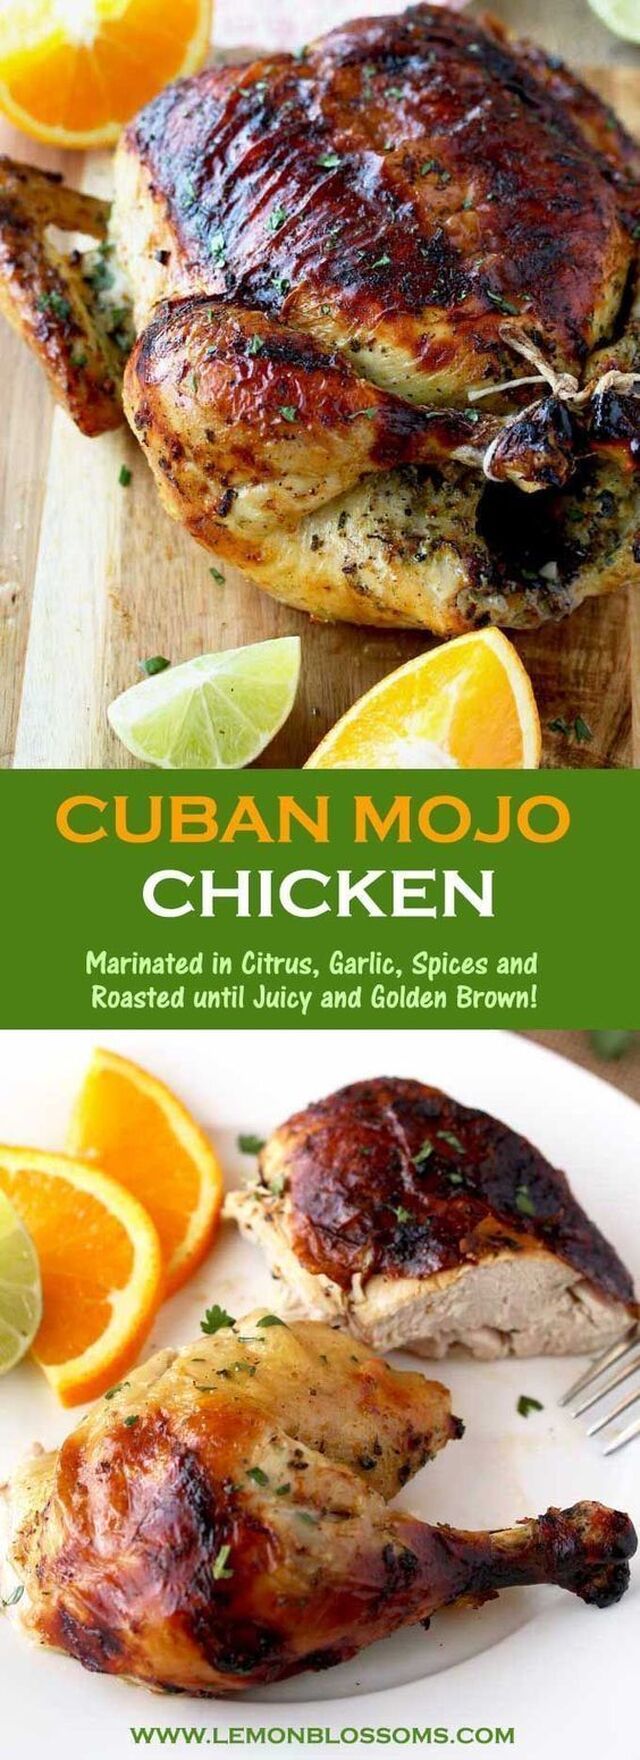 This Cuban Mojo Chicken is infused with a flavorful Mojo marinade made with citrus, garlic and spices, then oven roasted until gol… | Recipes, Cooking, Mojo chicken